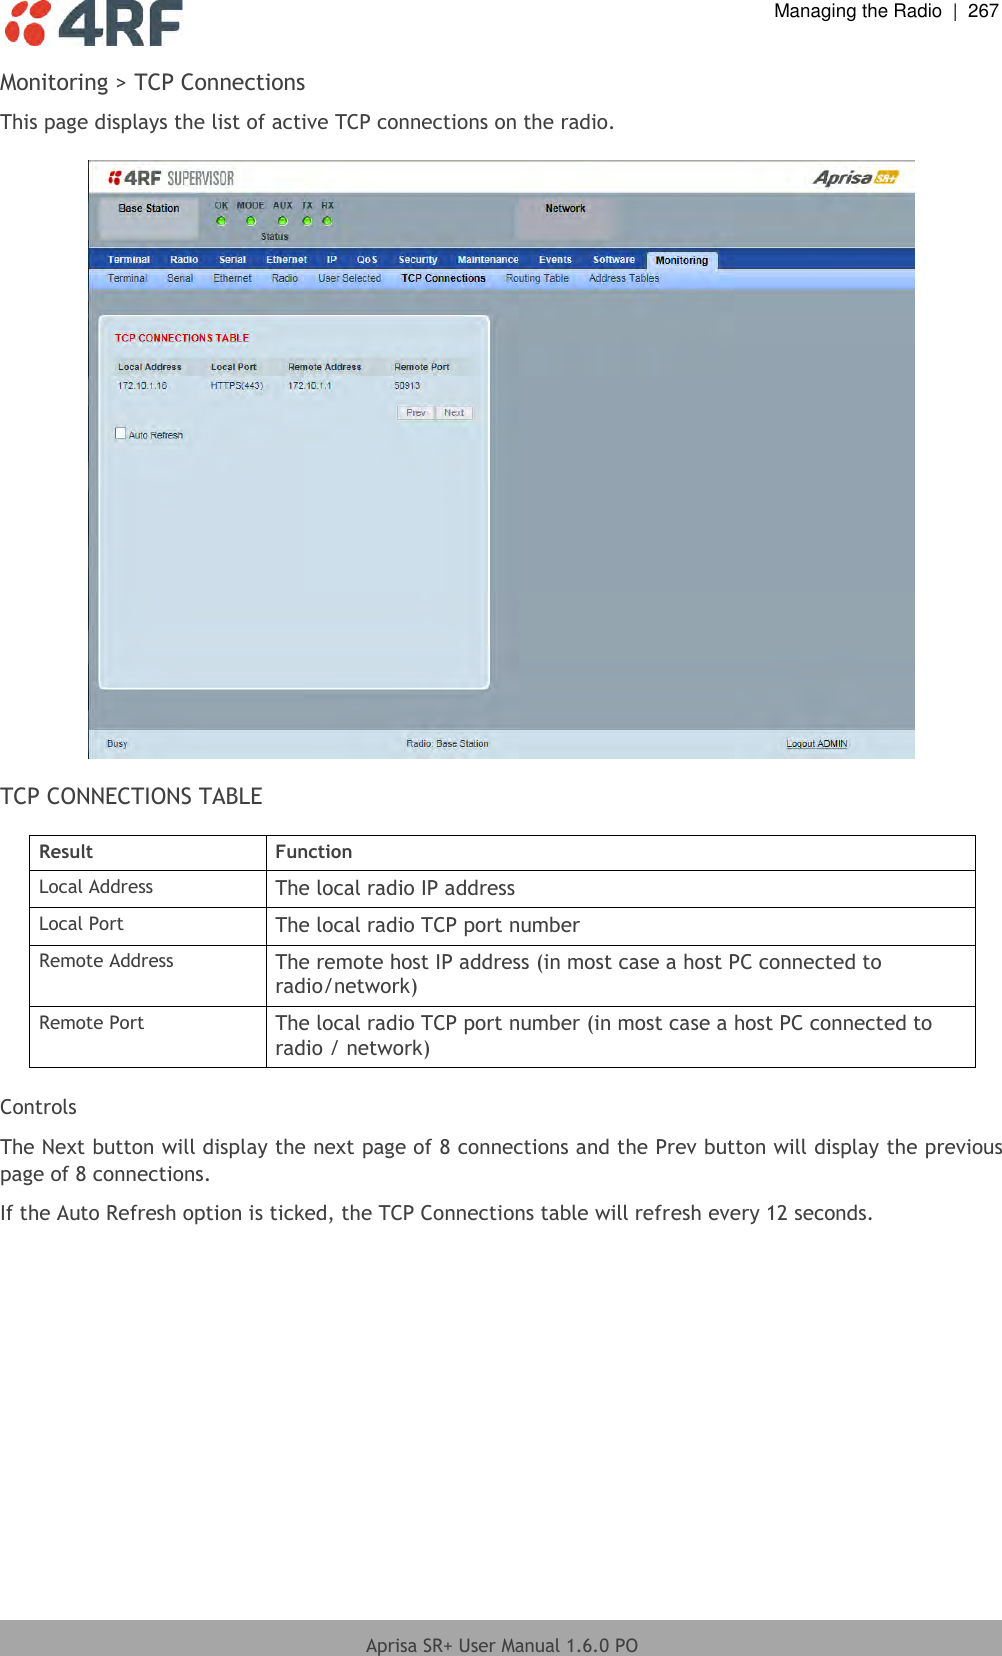  Managing the Radio  |  267  Aprisa SR+ User Manual 1.6.0 PO  Monitoring &gt; TCP Connections This page displays the list of active TCP connections on the radio.    TCP CONNECTIONS TABLE  Result Function Local Address The local radio IP address Local Port The local radio TCP port number Remote Address The remote host IP address (in most case a host PC connected to radio/network) Remote Port The local radio TCP port number (in most case a host PC connected to radio / network)  Controls The Next button will display the next page of 8 connections and the Prev button will display the previous page of 8 connections. If the Auto Refresh option is ticked, the TCP Connections table will refresh every 12 seconds.  